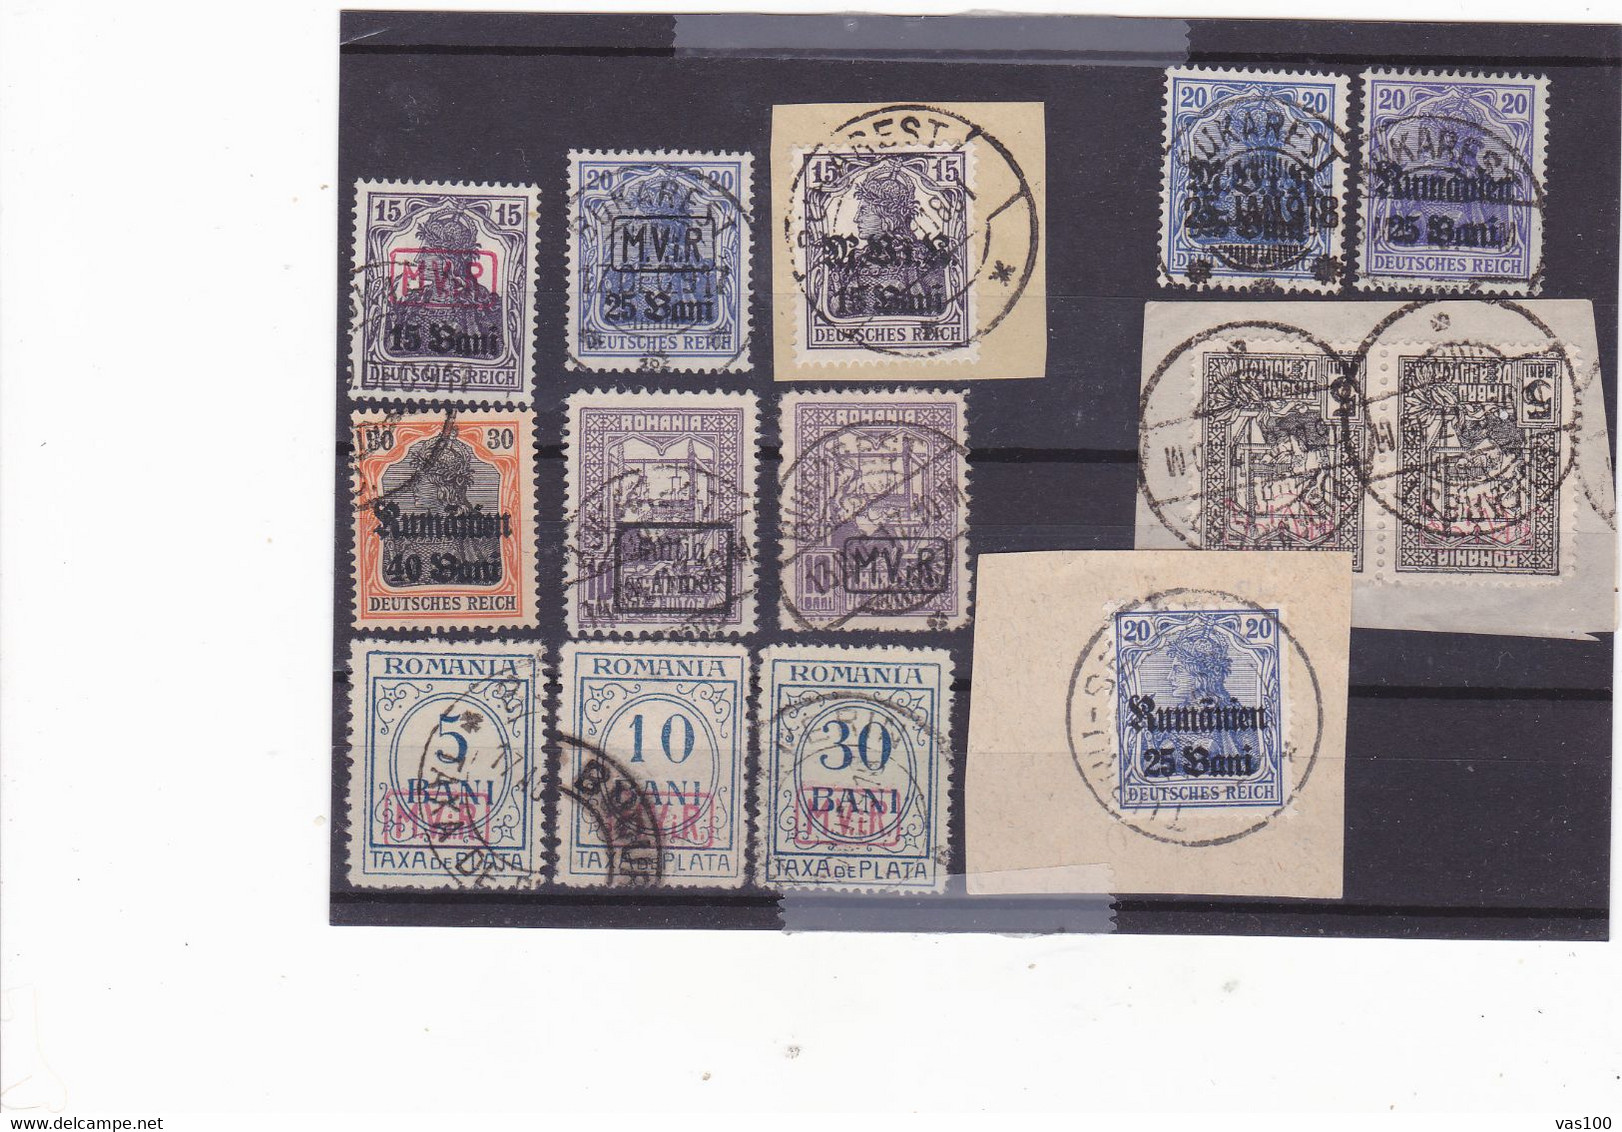 Germany Occupation Romania In WWI 1917-8 OVERPRINT LOT14 STAMPS - Foreign Occupations